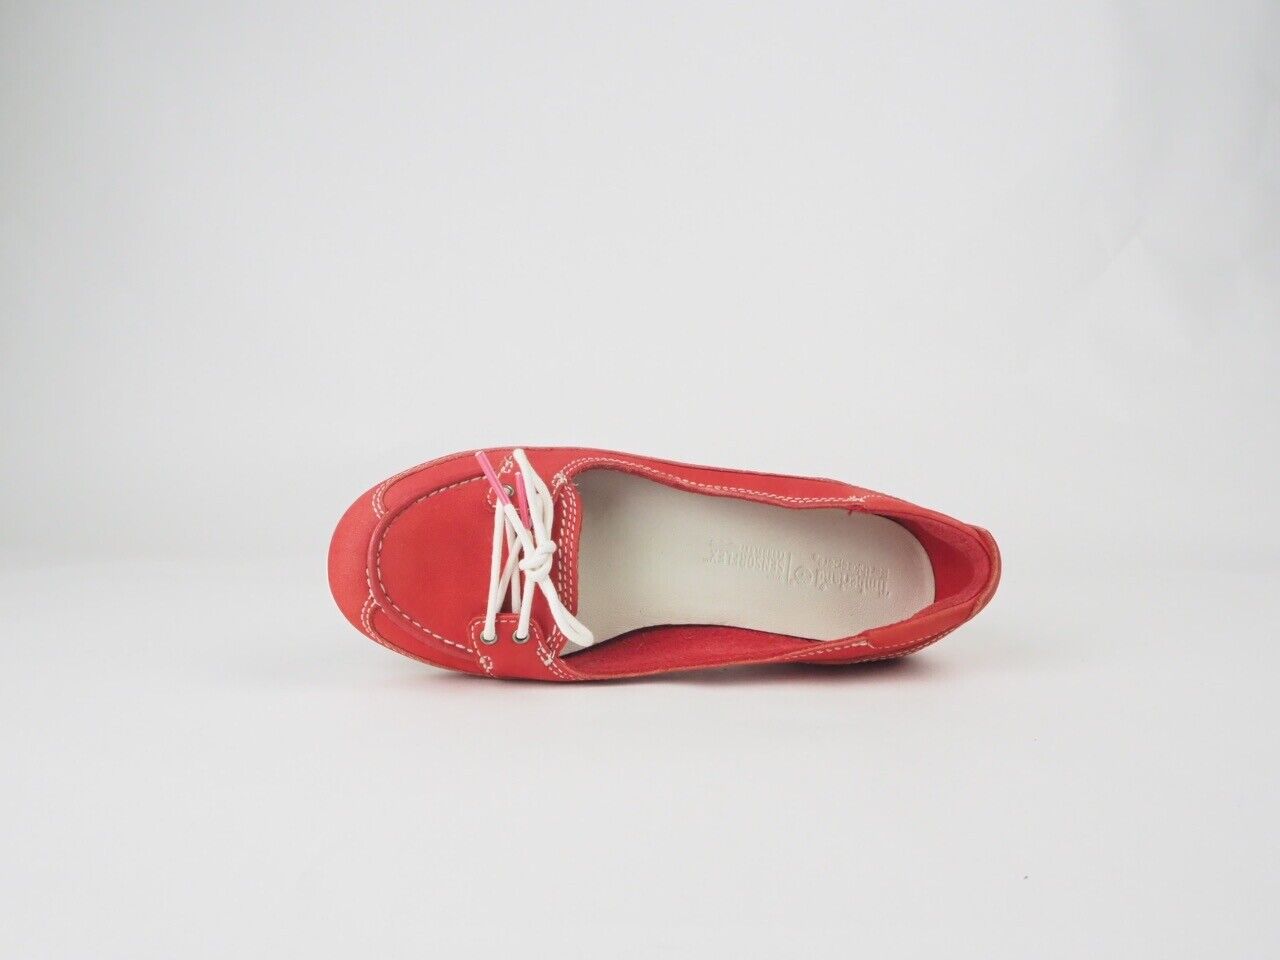 Womens Timberland Ek Belle Island 8952 RM Red Leather Loafet Slips On Shoes - London Top Style